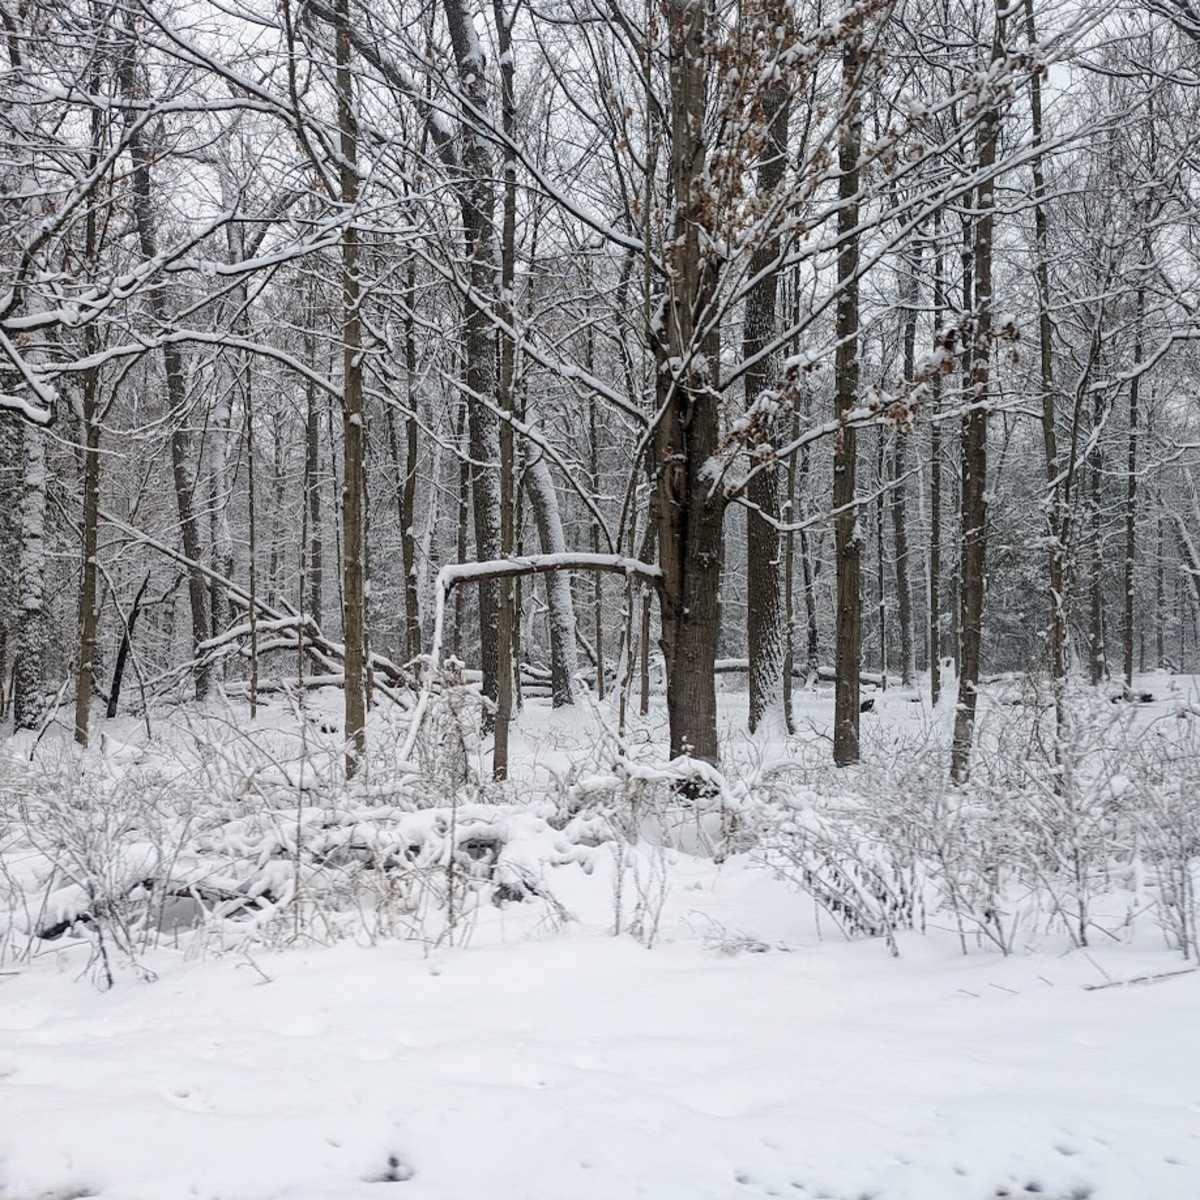 Looking into the woods, hundreds of skinny trees among a blanketing of snow, maybe 4 or 5 inches of it.